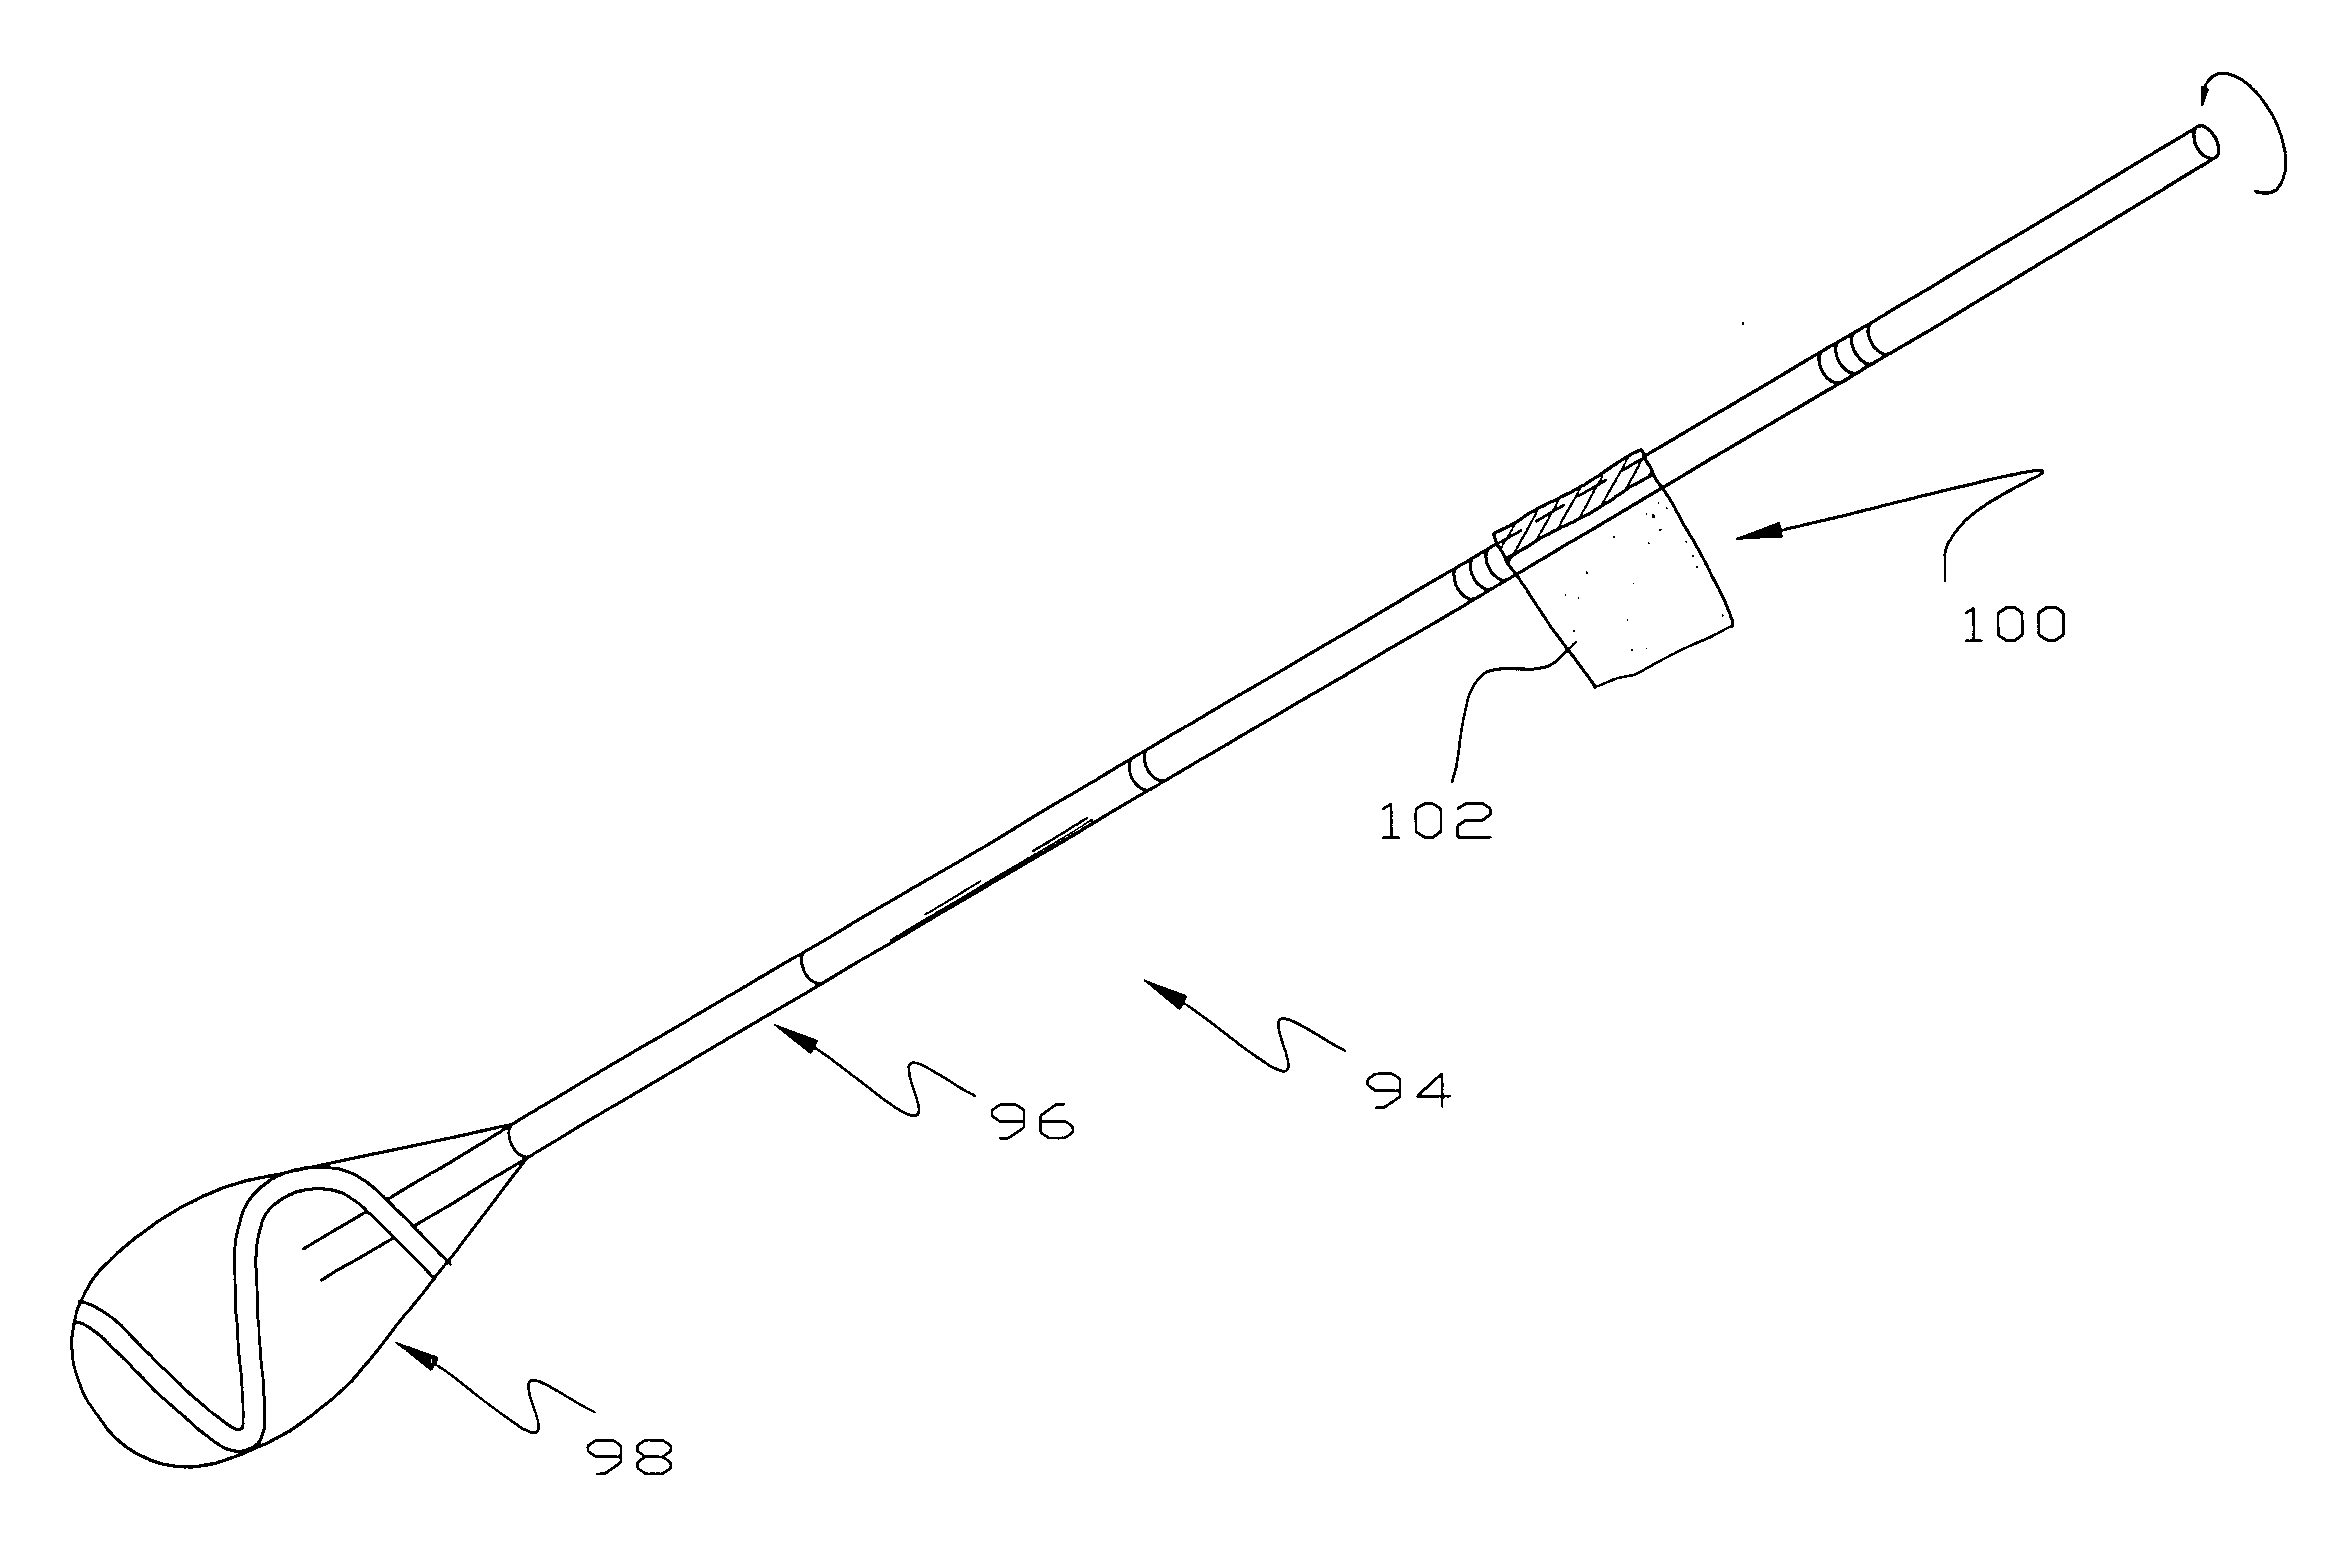 Surgery accessory and method of use